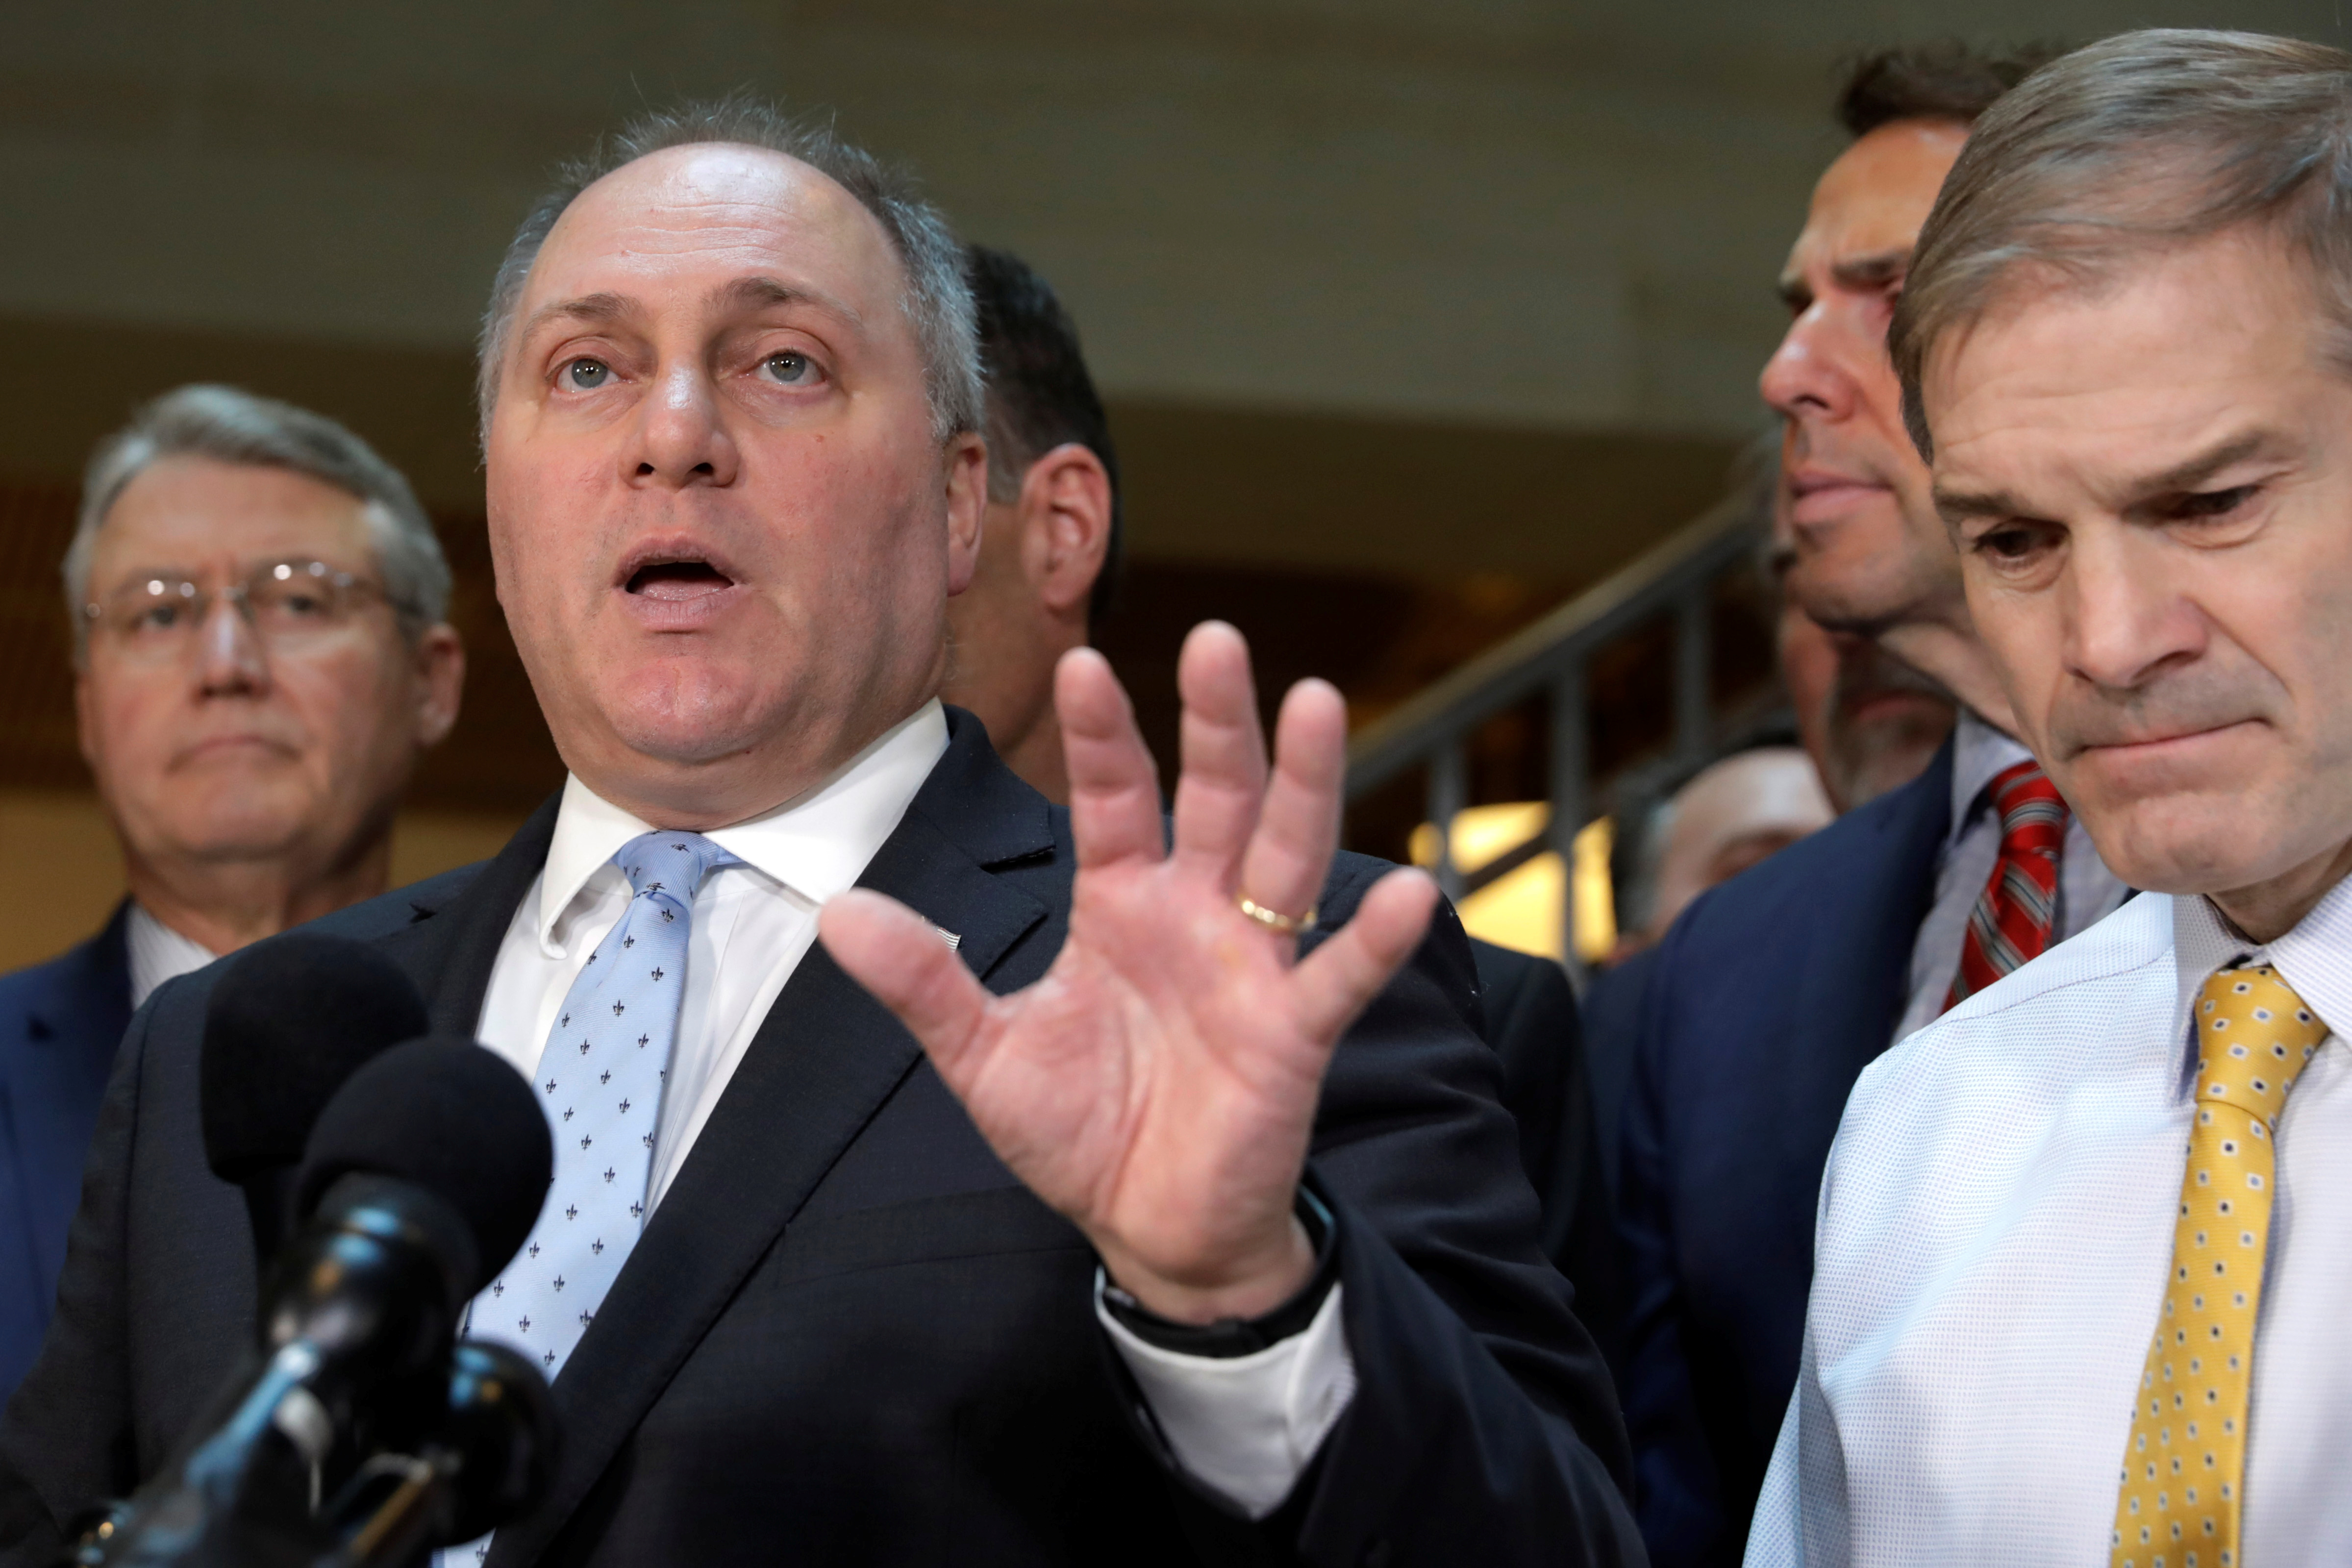 House Republican Whip Steve Scalise, who led the confrontation, told reporters: "There are going...